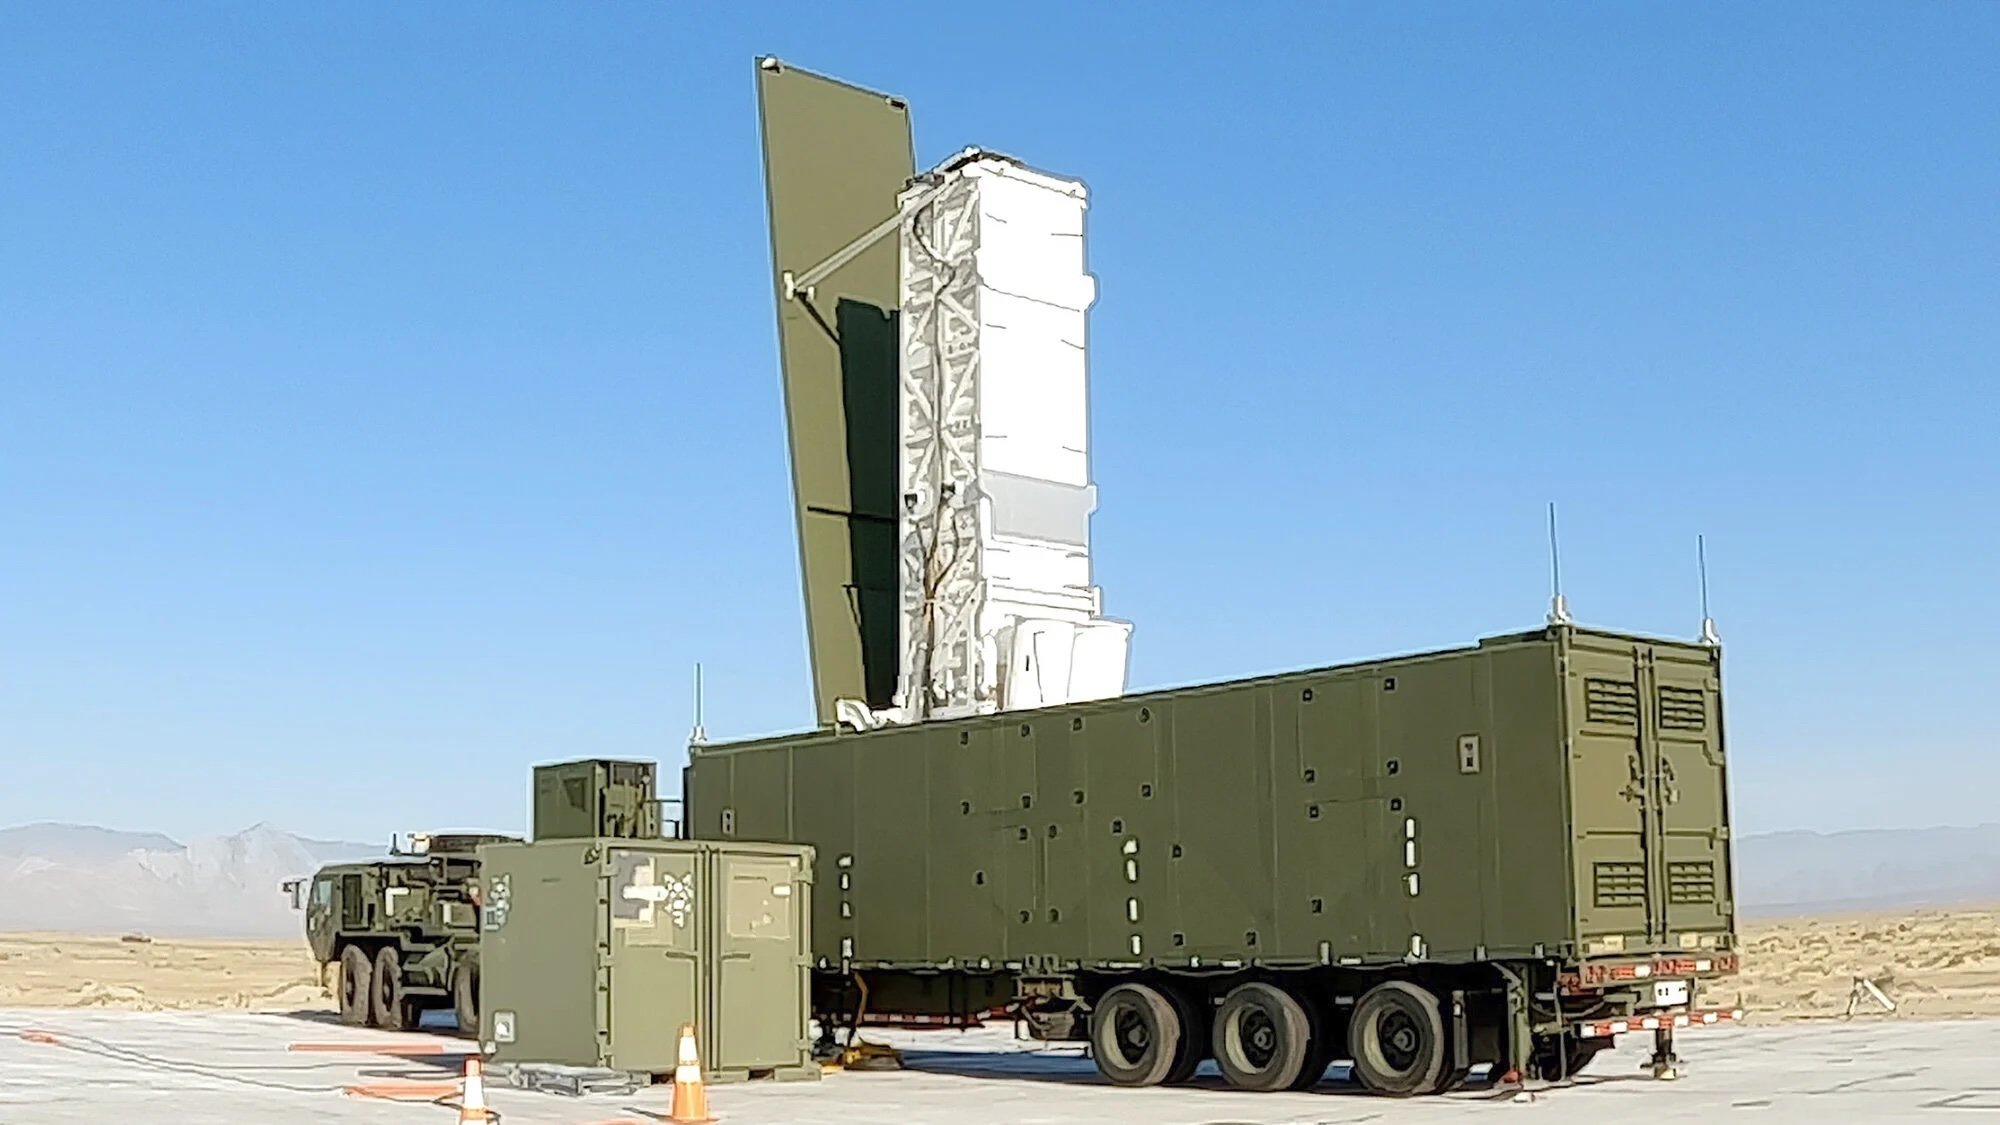 The US Army’s new medium-range missile launch system, the Typhon. The system was deployed to the Philippines last month as part of the Balikatan joint military exercises. Photo: US Army